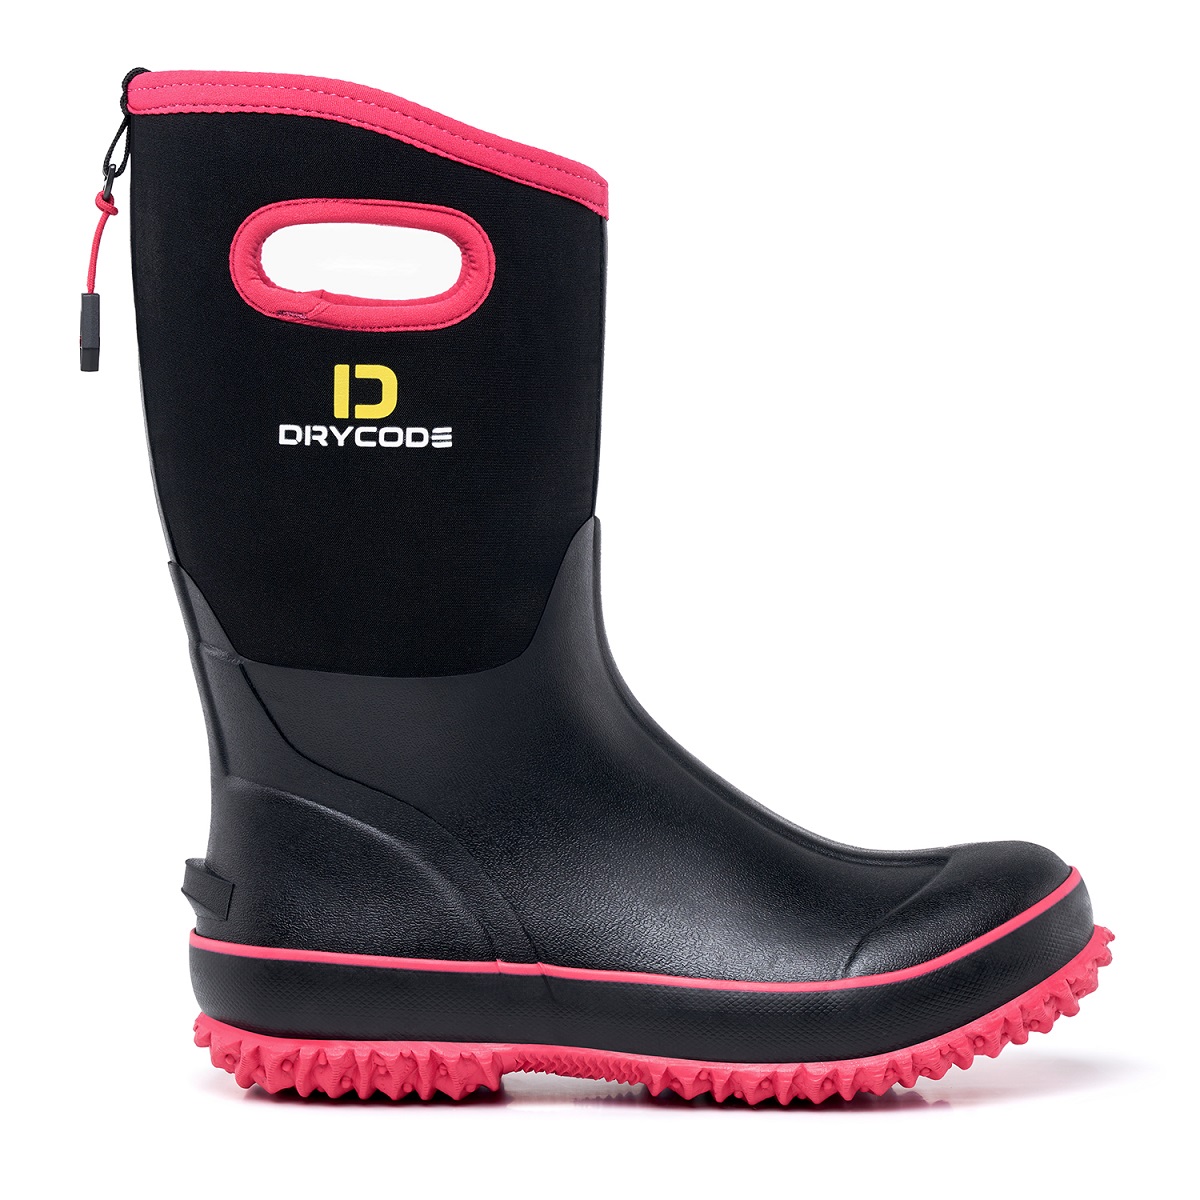 DRYCODE Rubber Boots (Pink) for Women's Gardening Farming